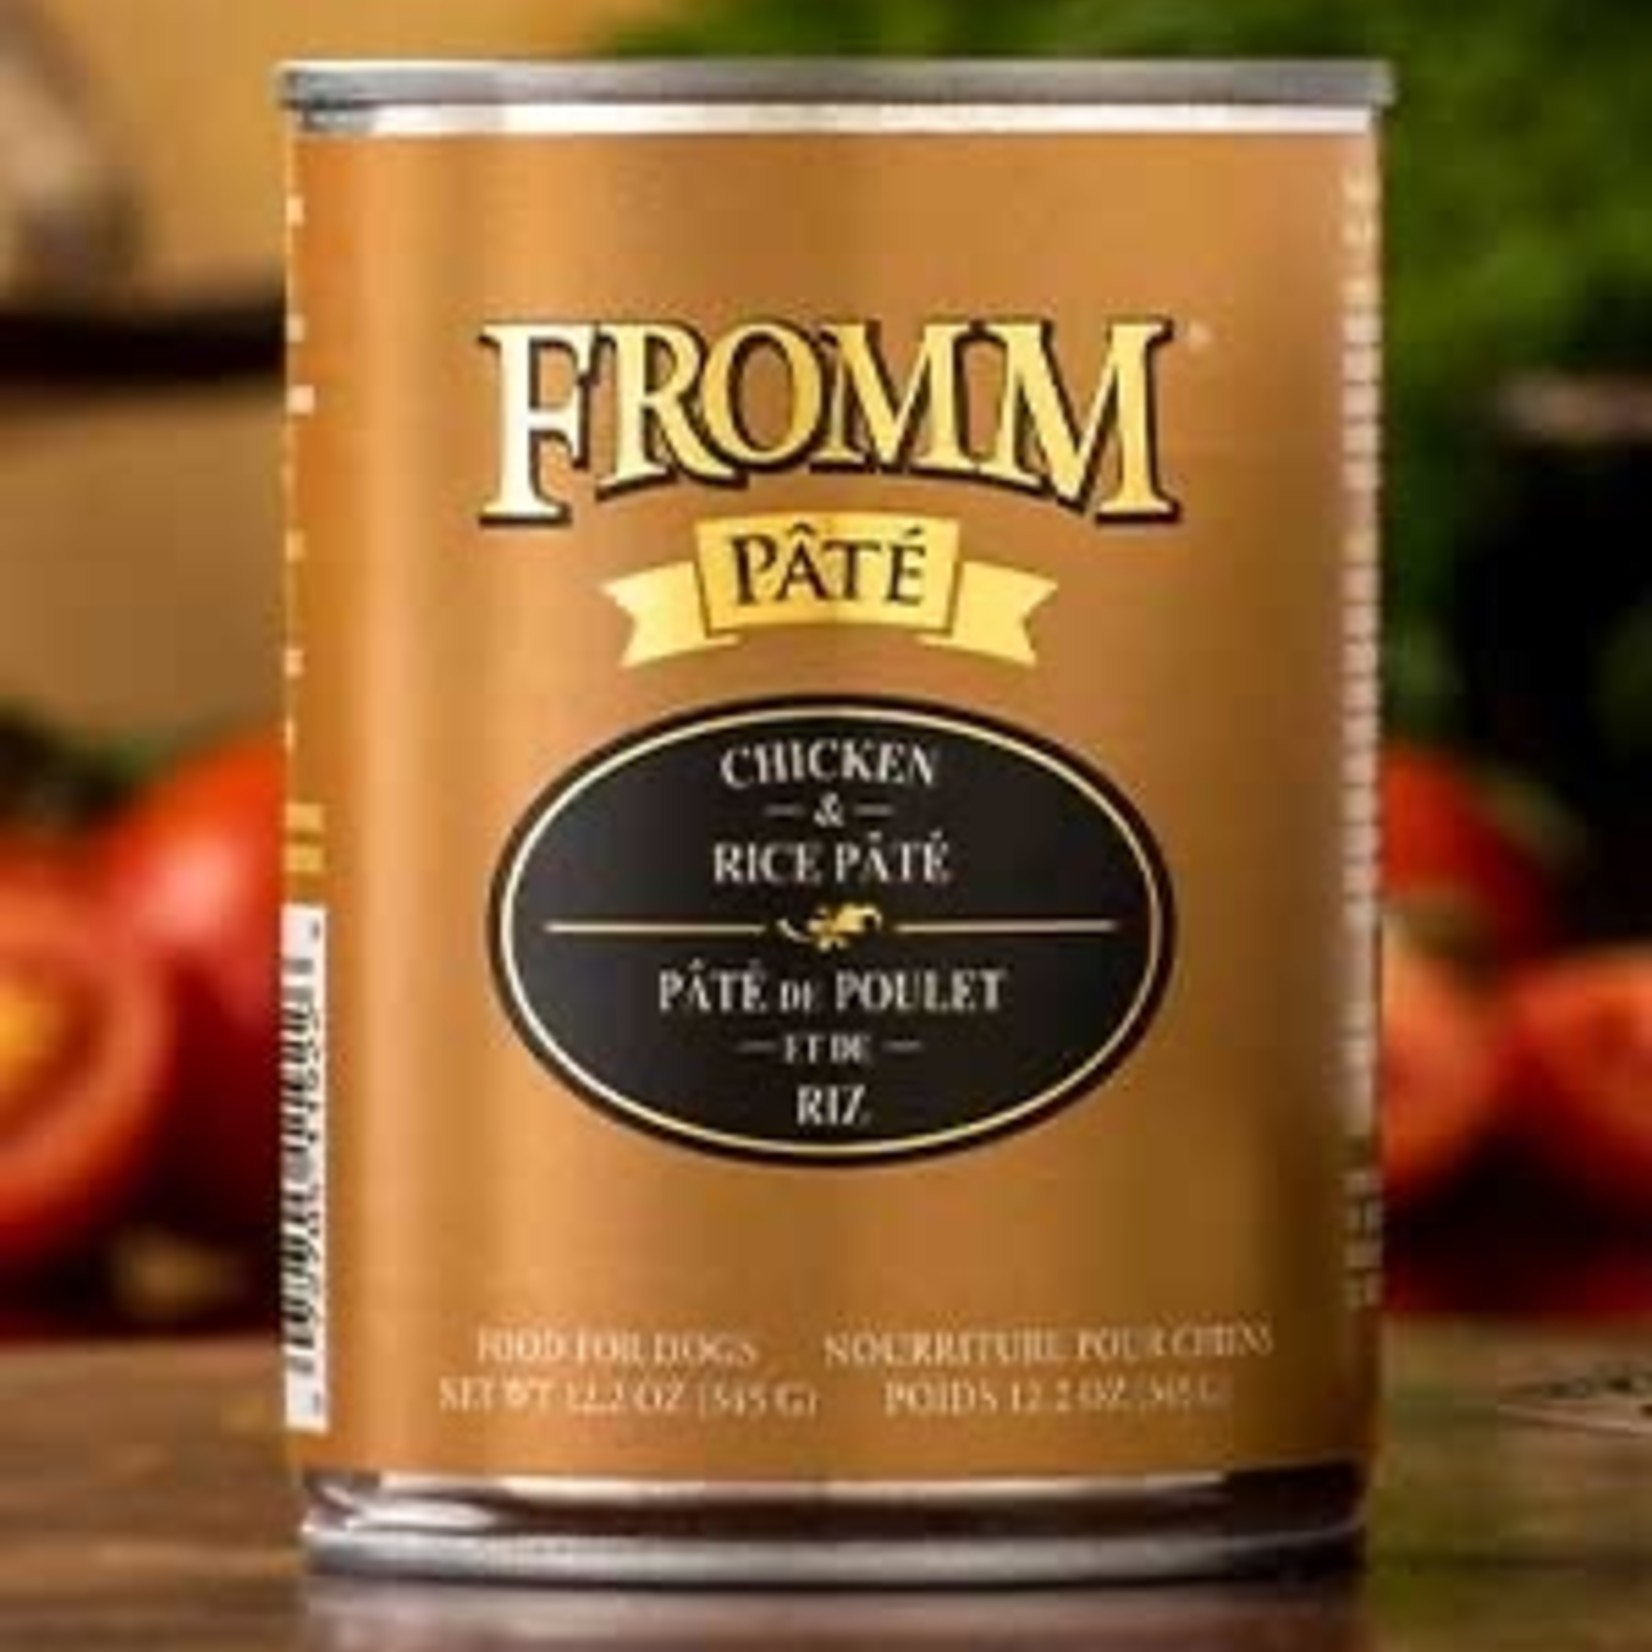 FROMM Fromm CHICKEN/RICE PATE 12 OZ